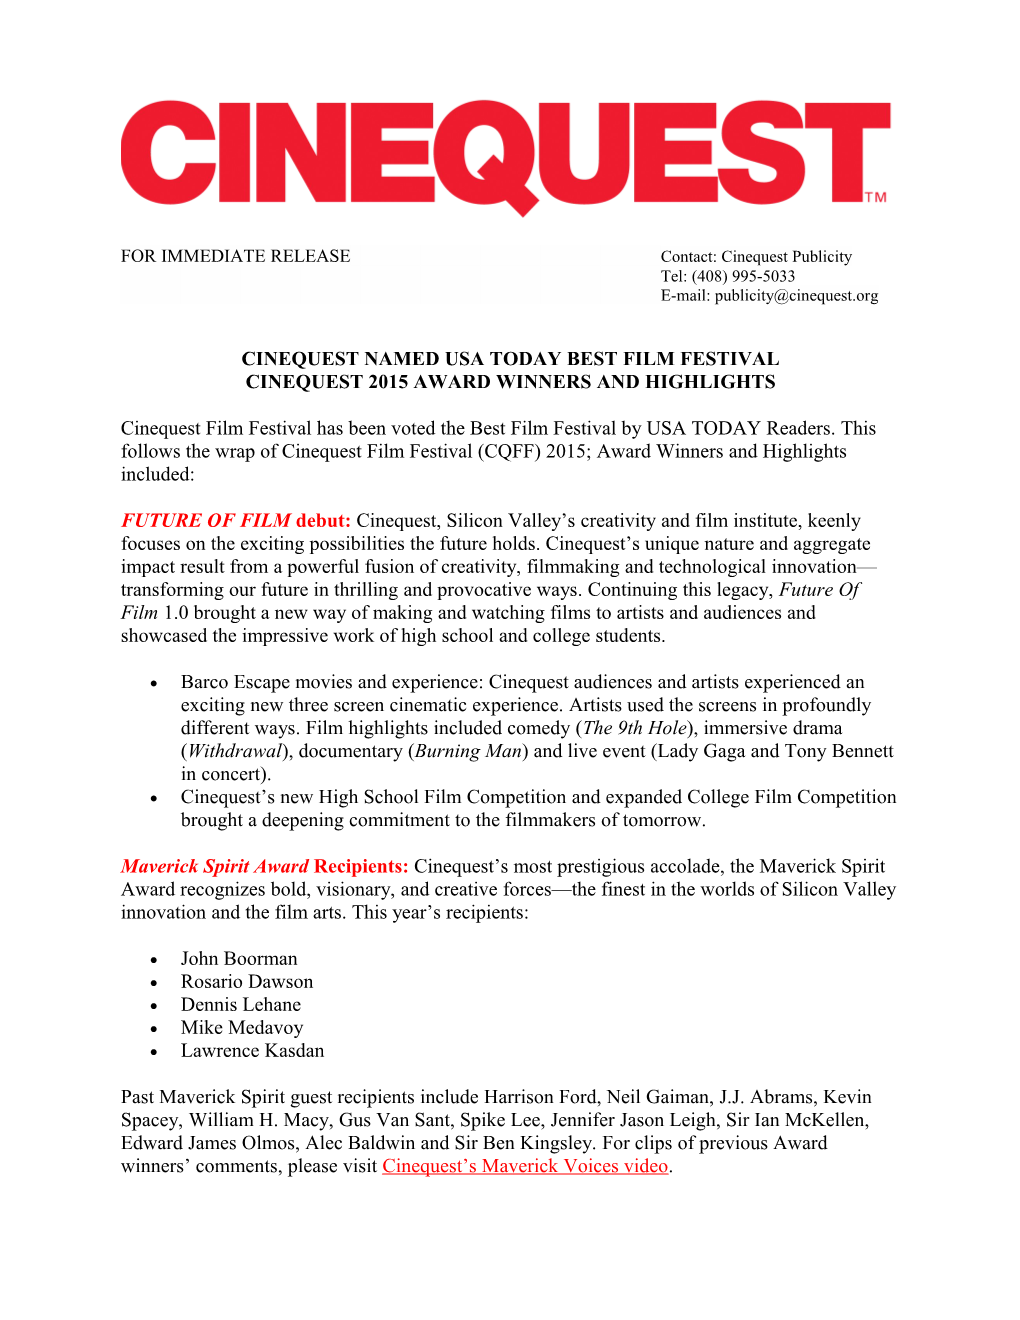 FOR IMMEDIATE Releasecontact: Cinequest Publicity